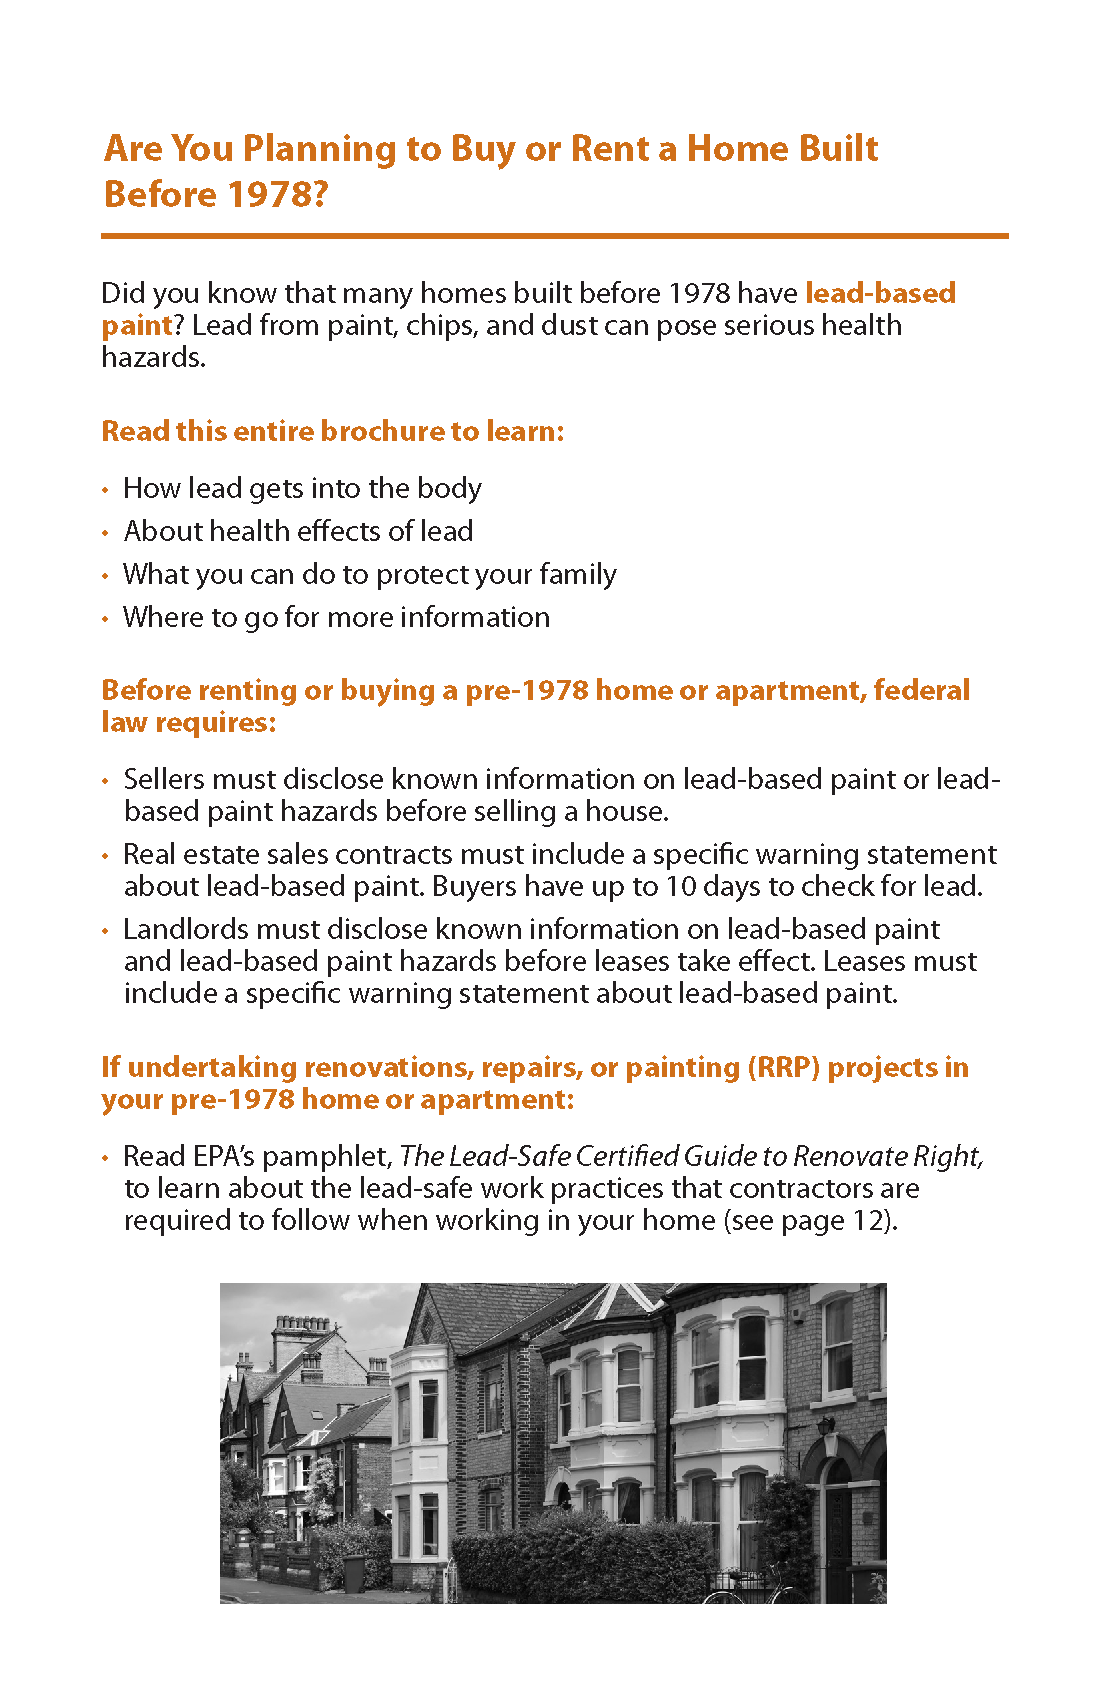 Grant County Protect your family from lead based paint